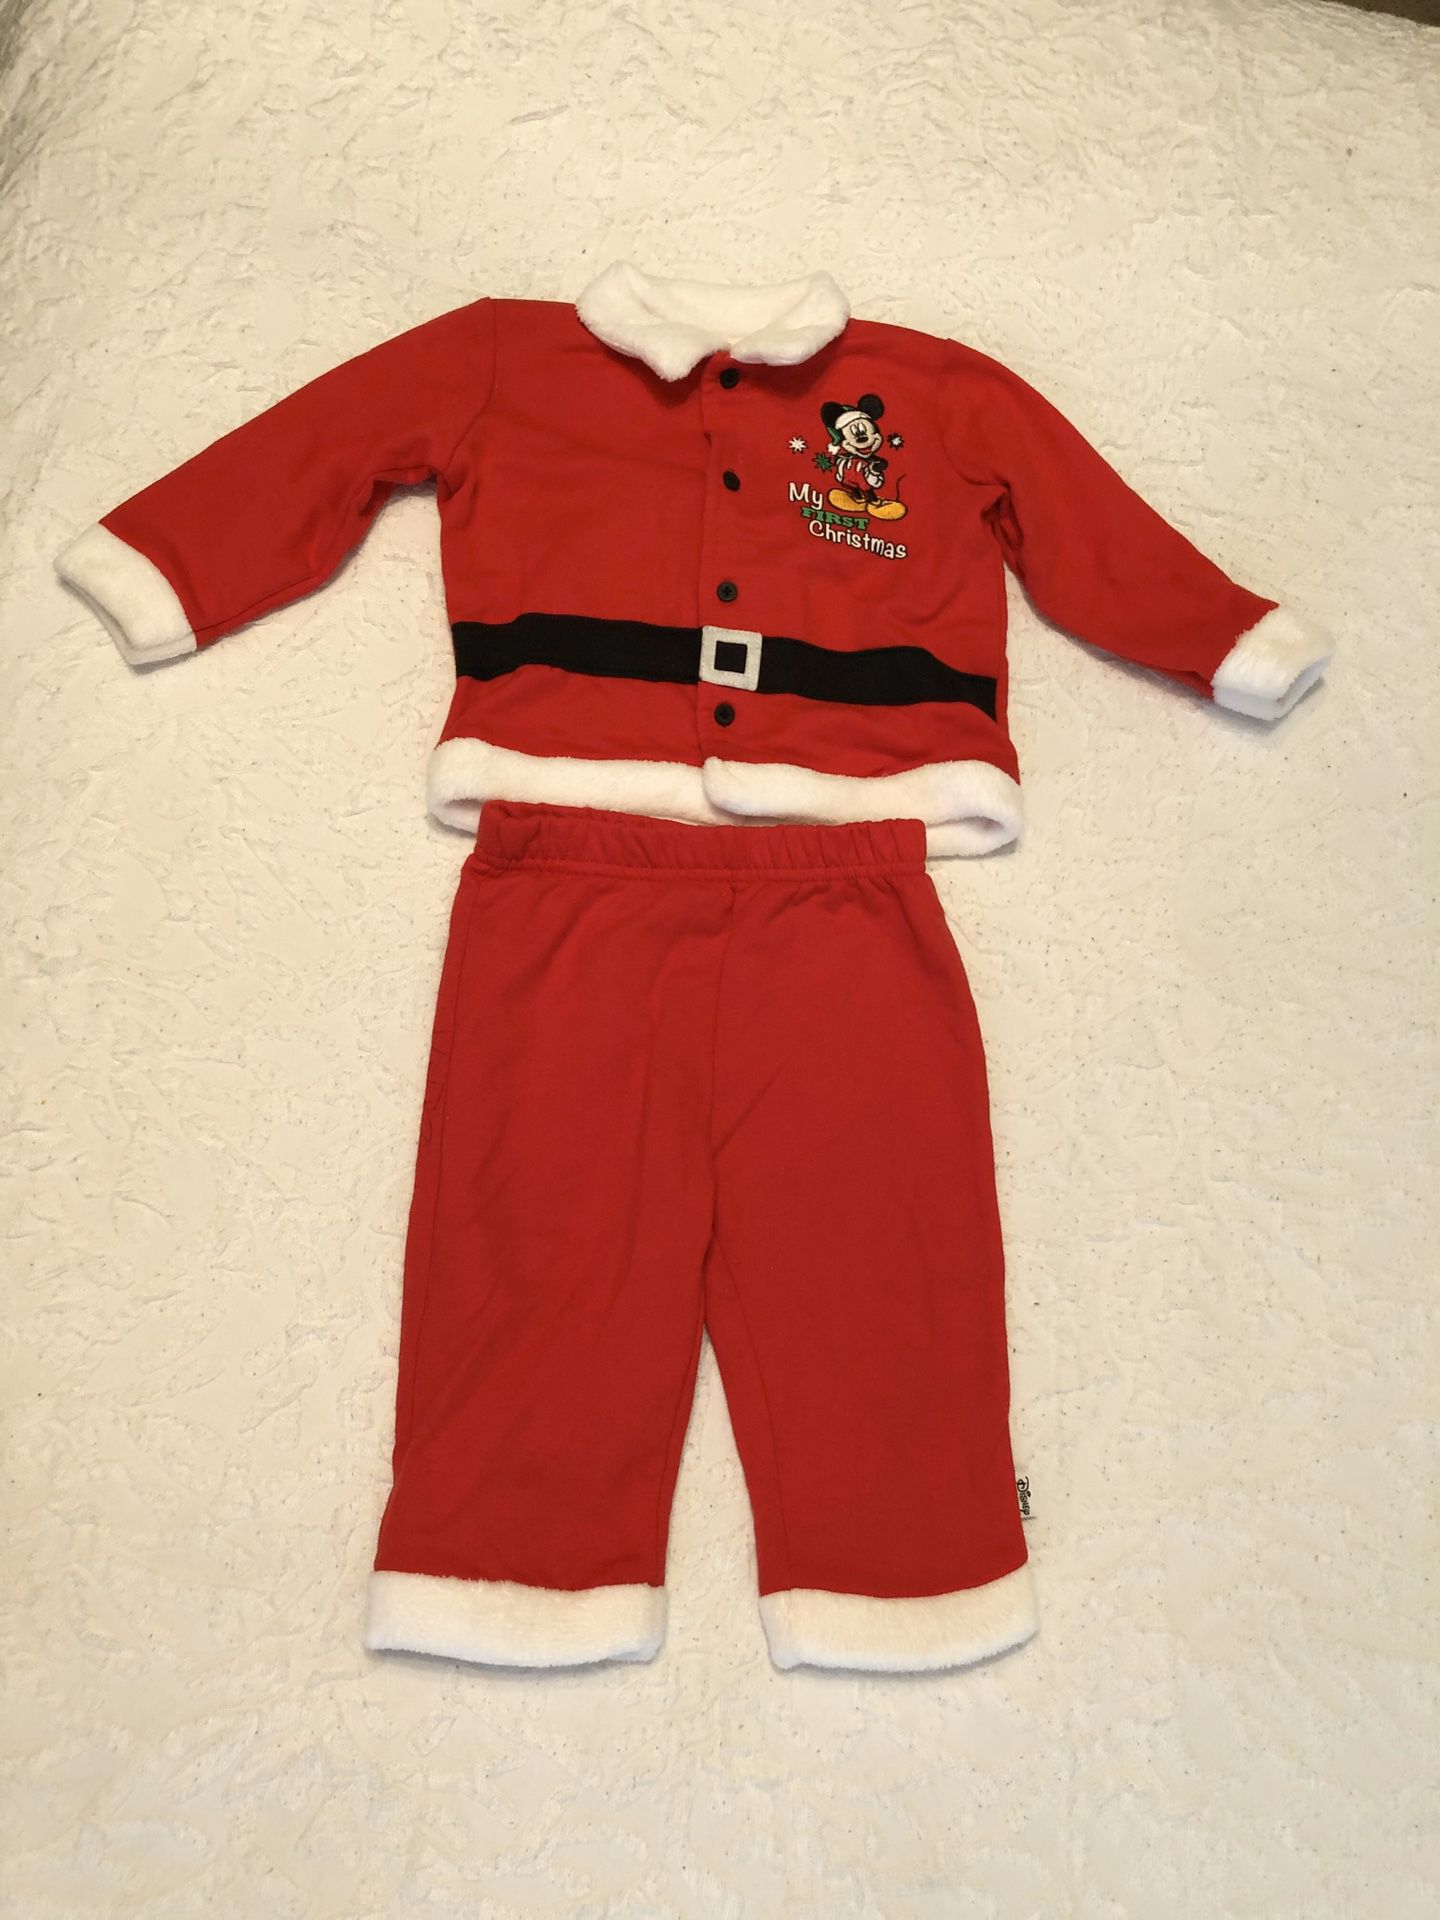 9-12 Months "1st Christmas" Outfit